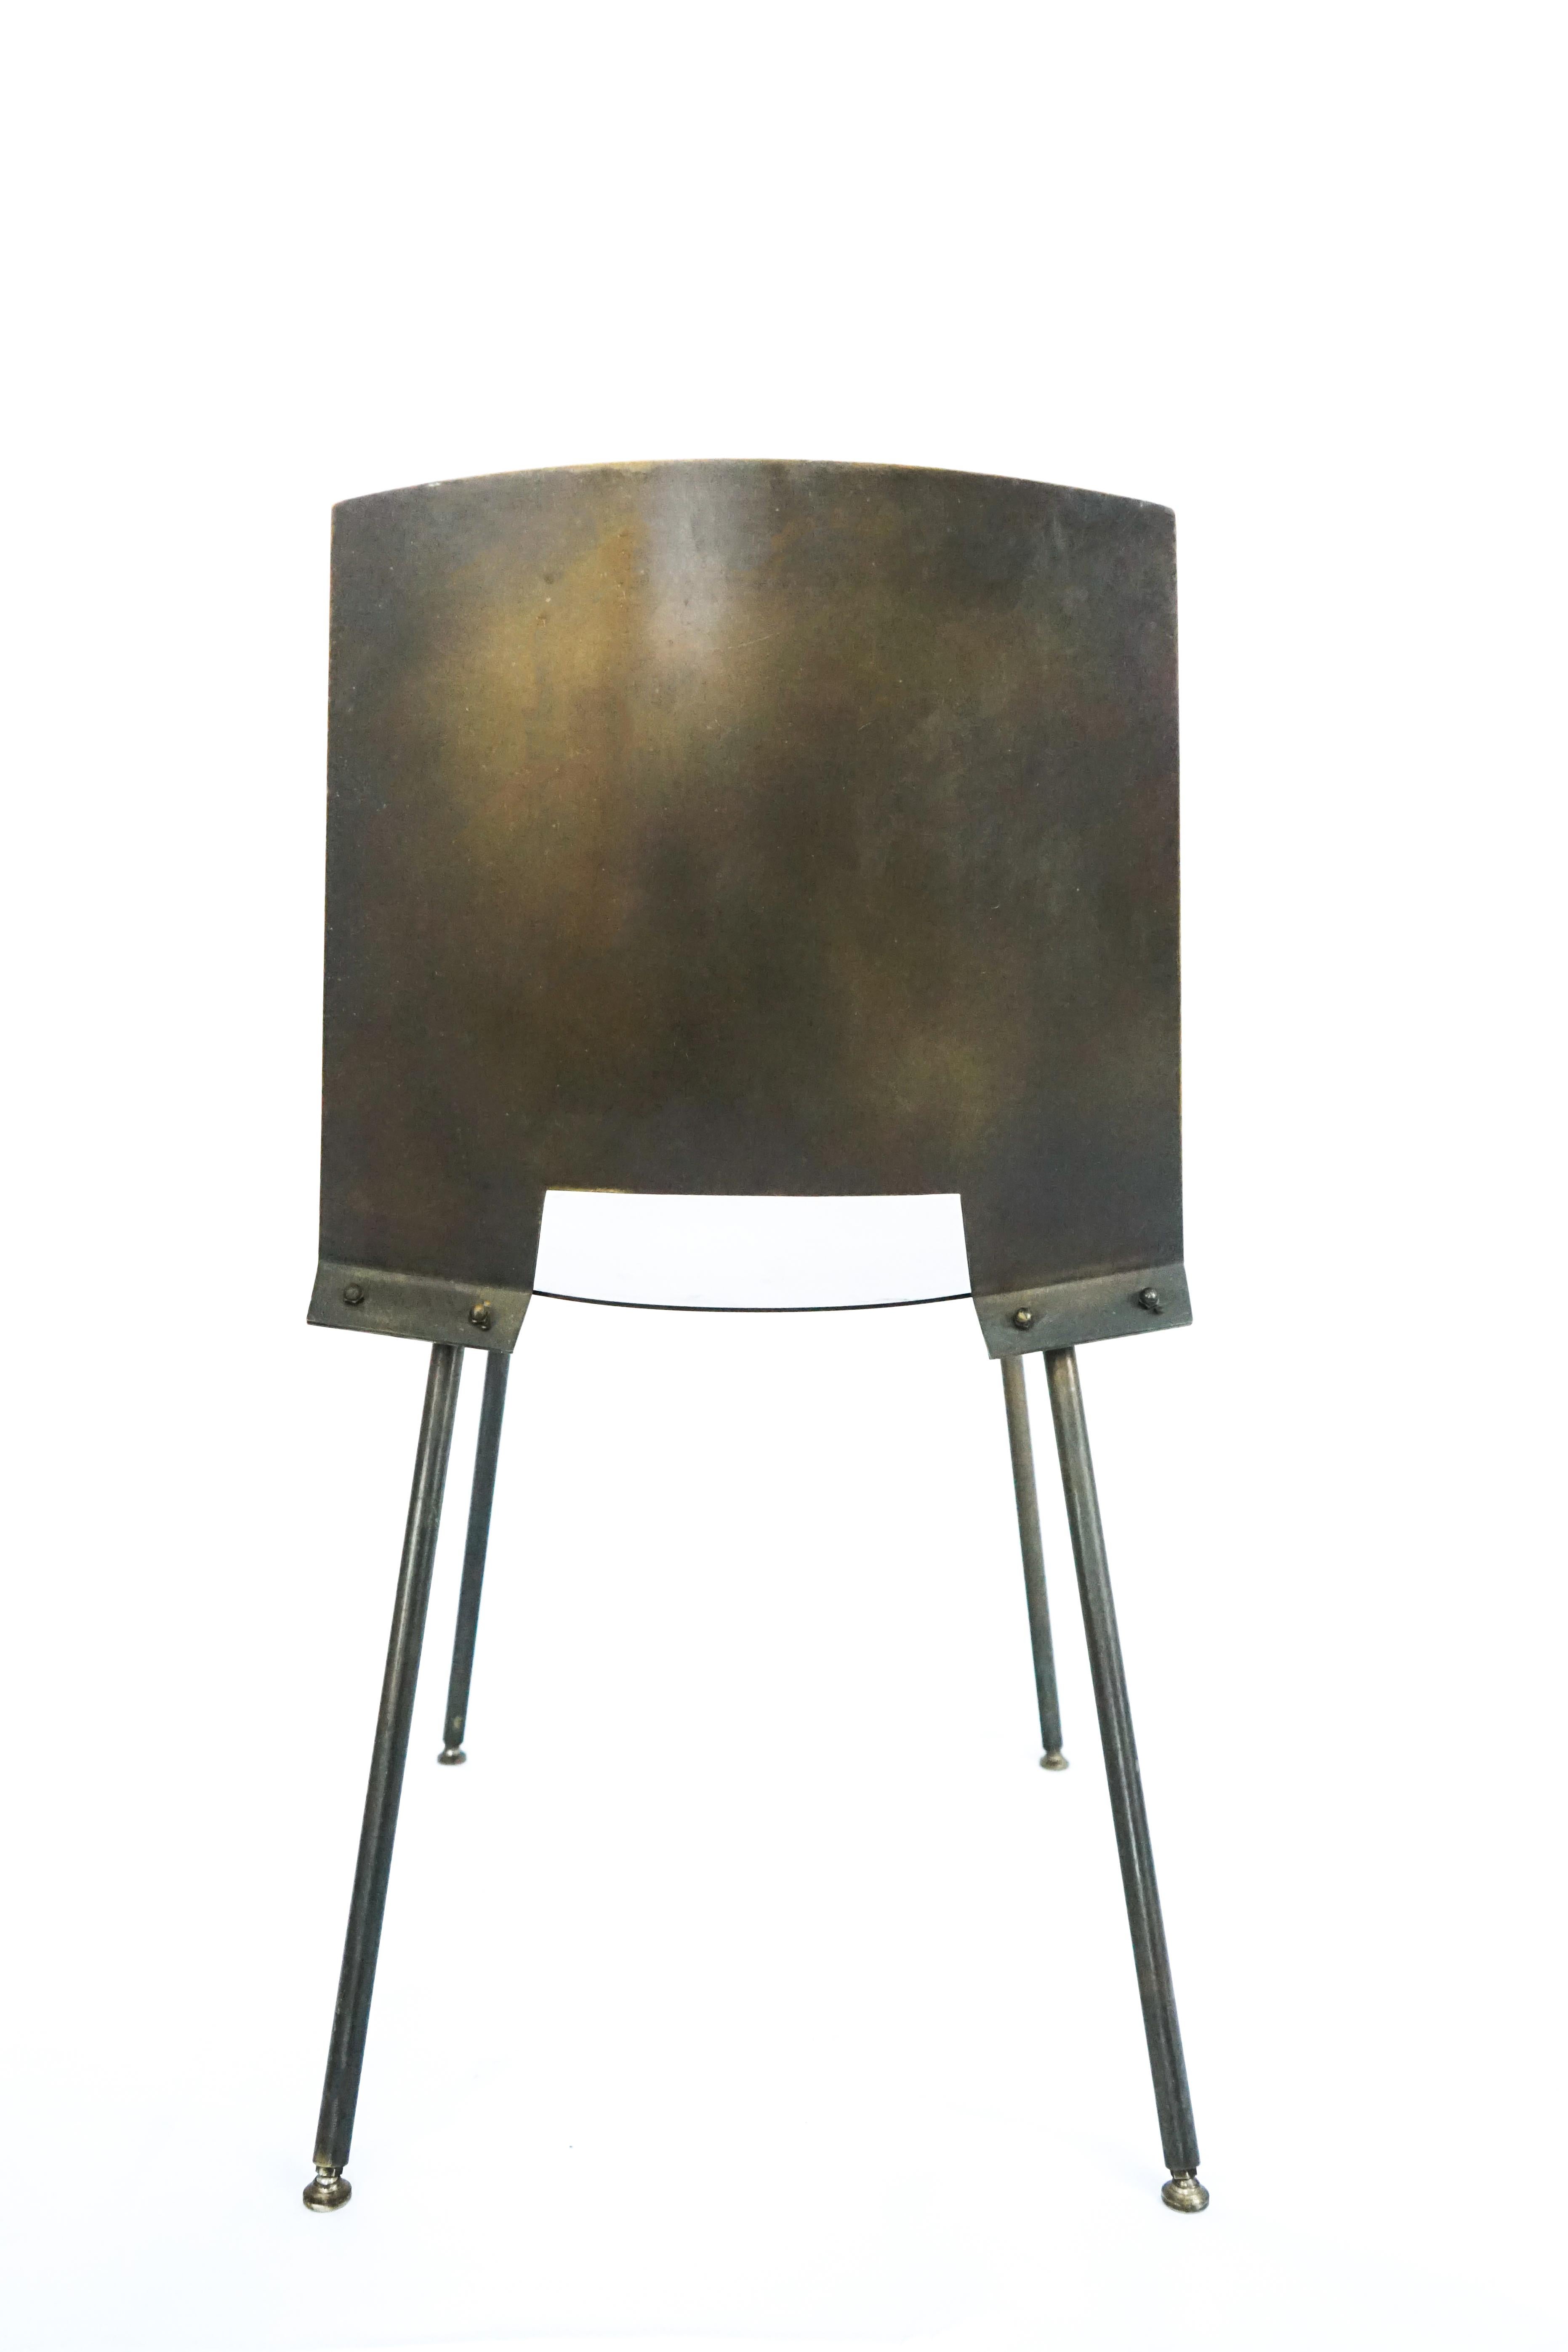 Contemporary 21st century, contemporary, modern, Minimalist, Bronze Sheet Metal Side Chair  For Sale